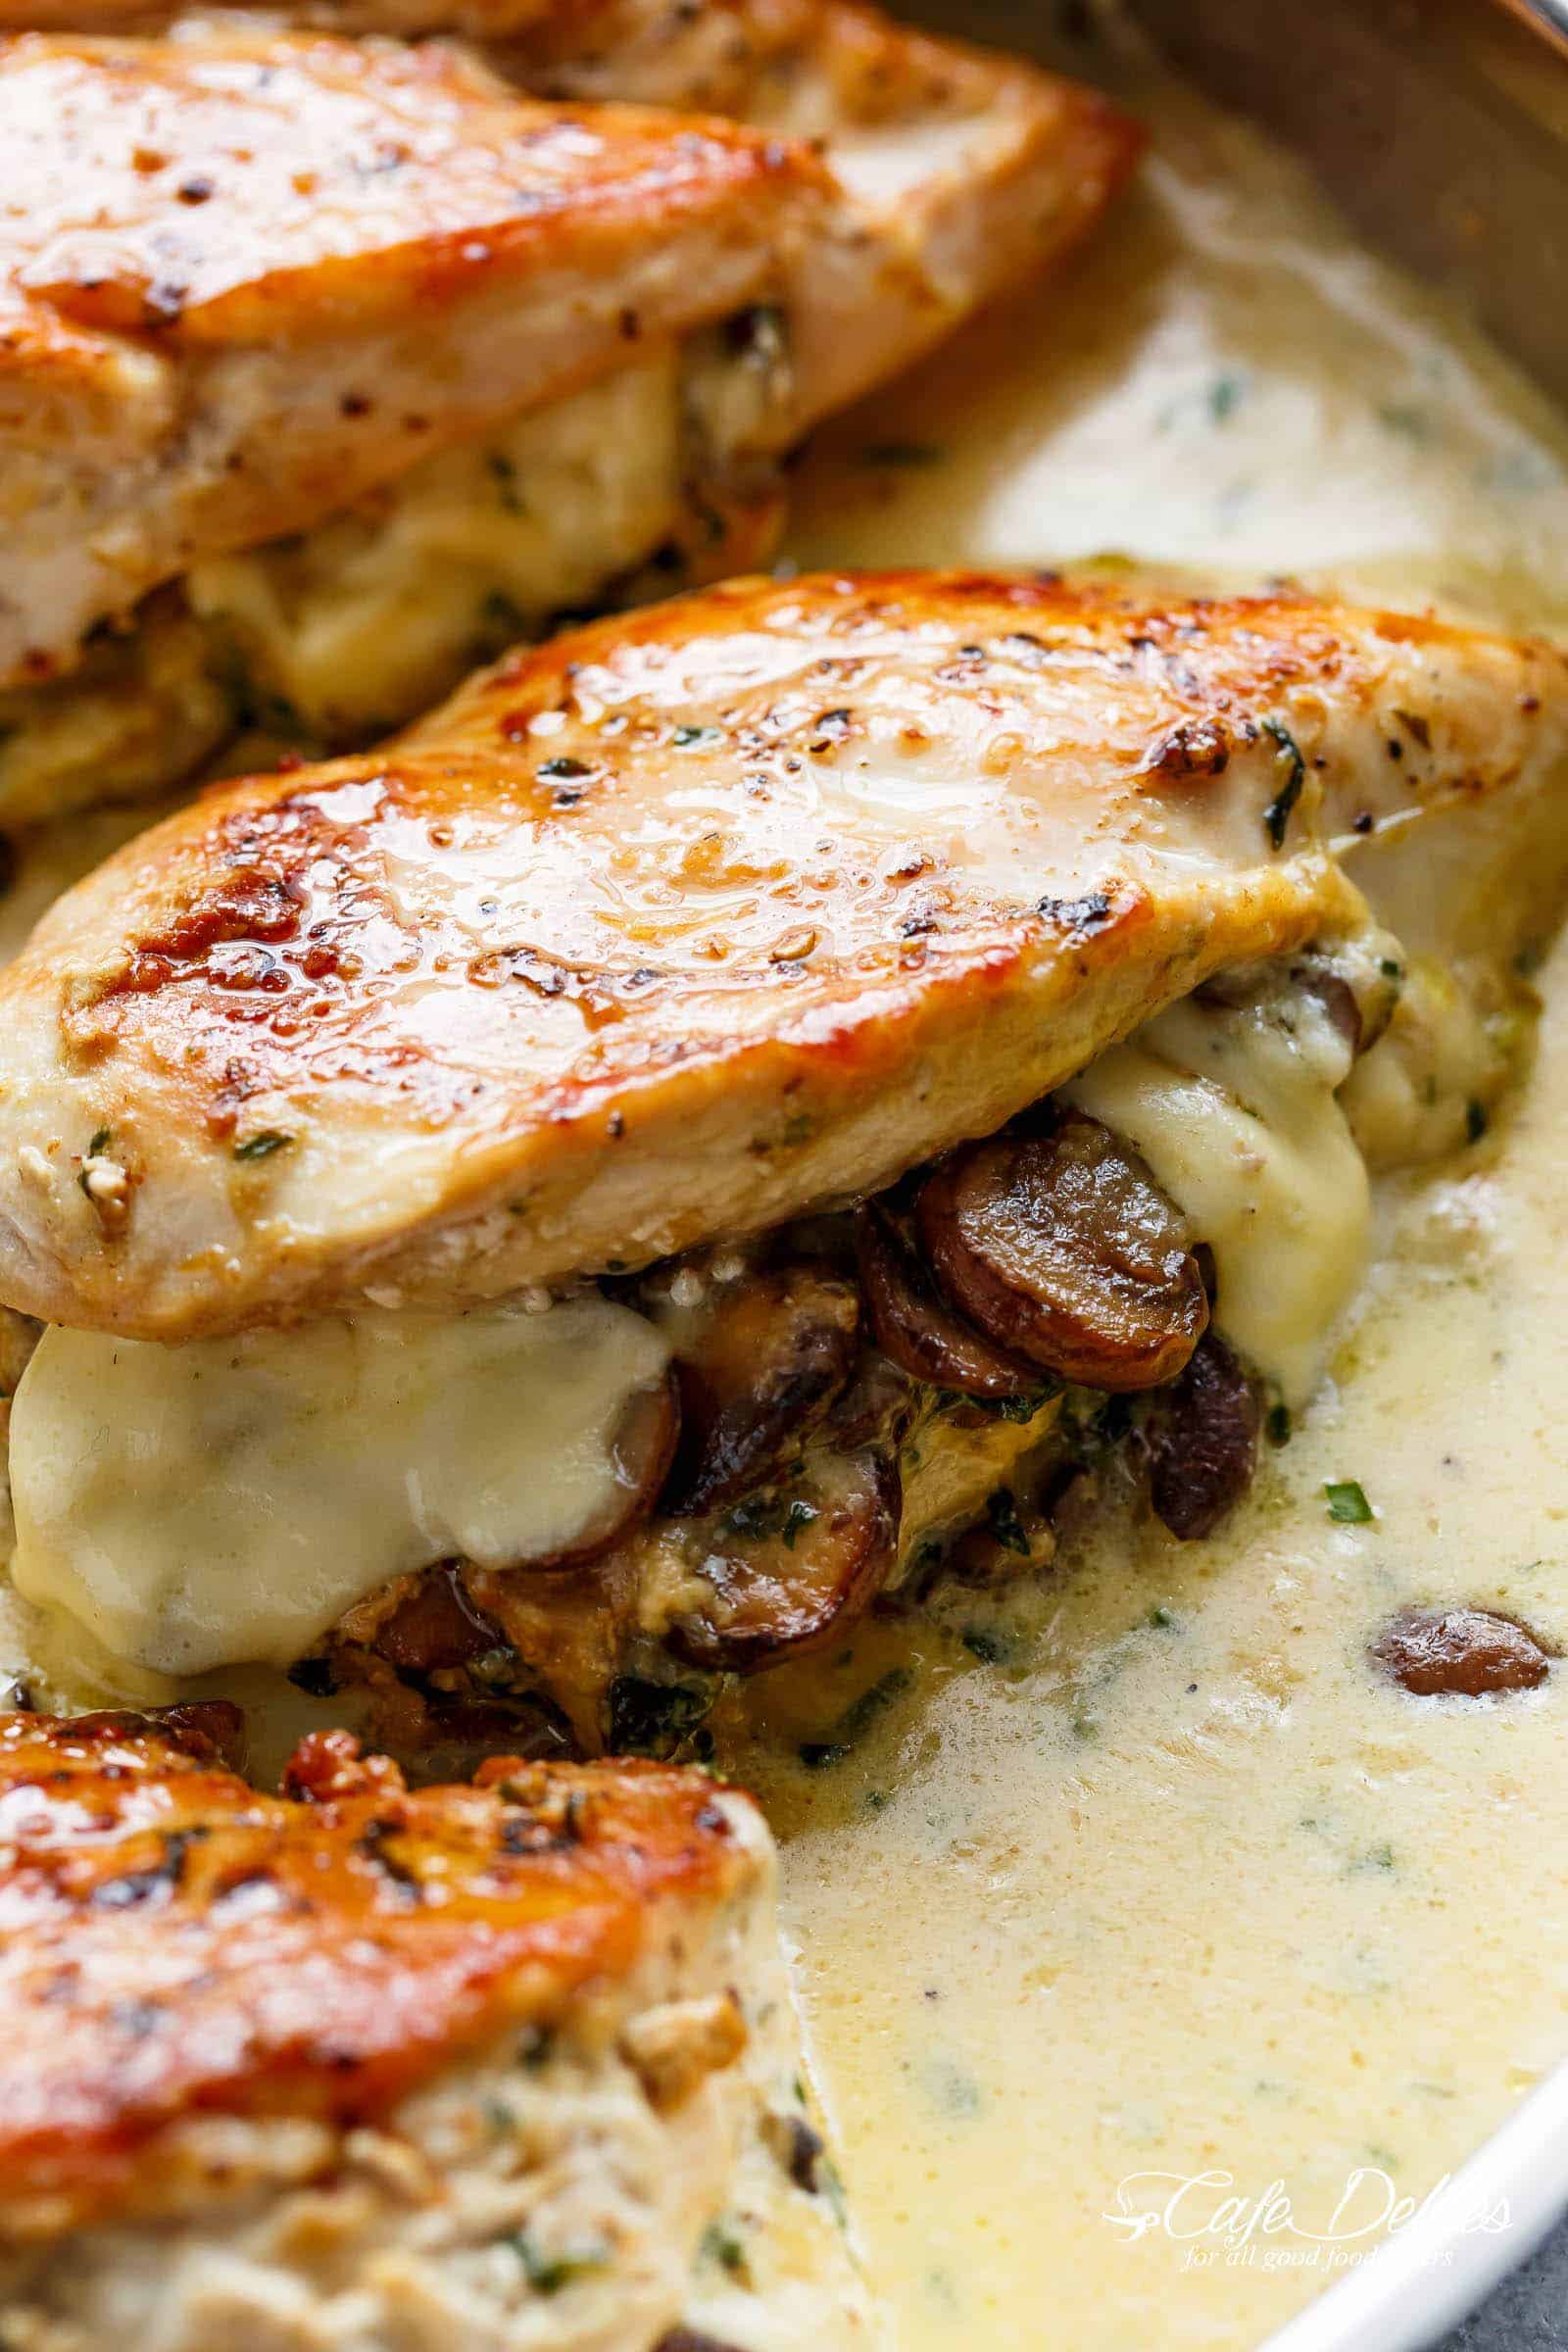 A close up image of cheesy mushrooms stuffed in a seared cooked chicken breast in a cream sauce